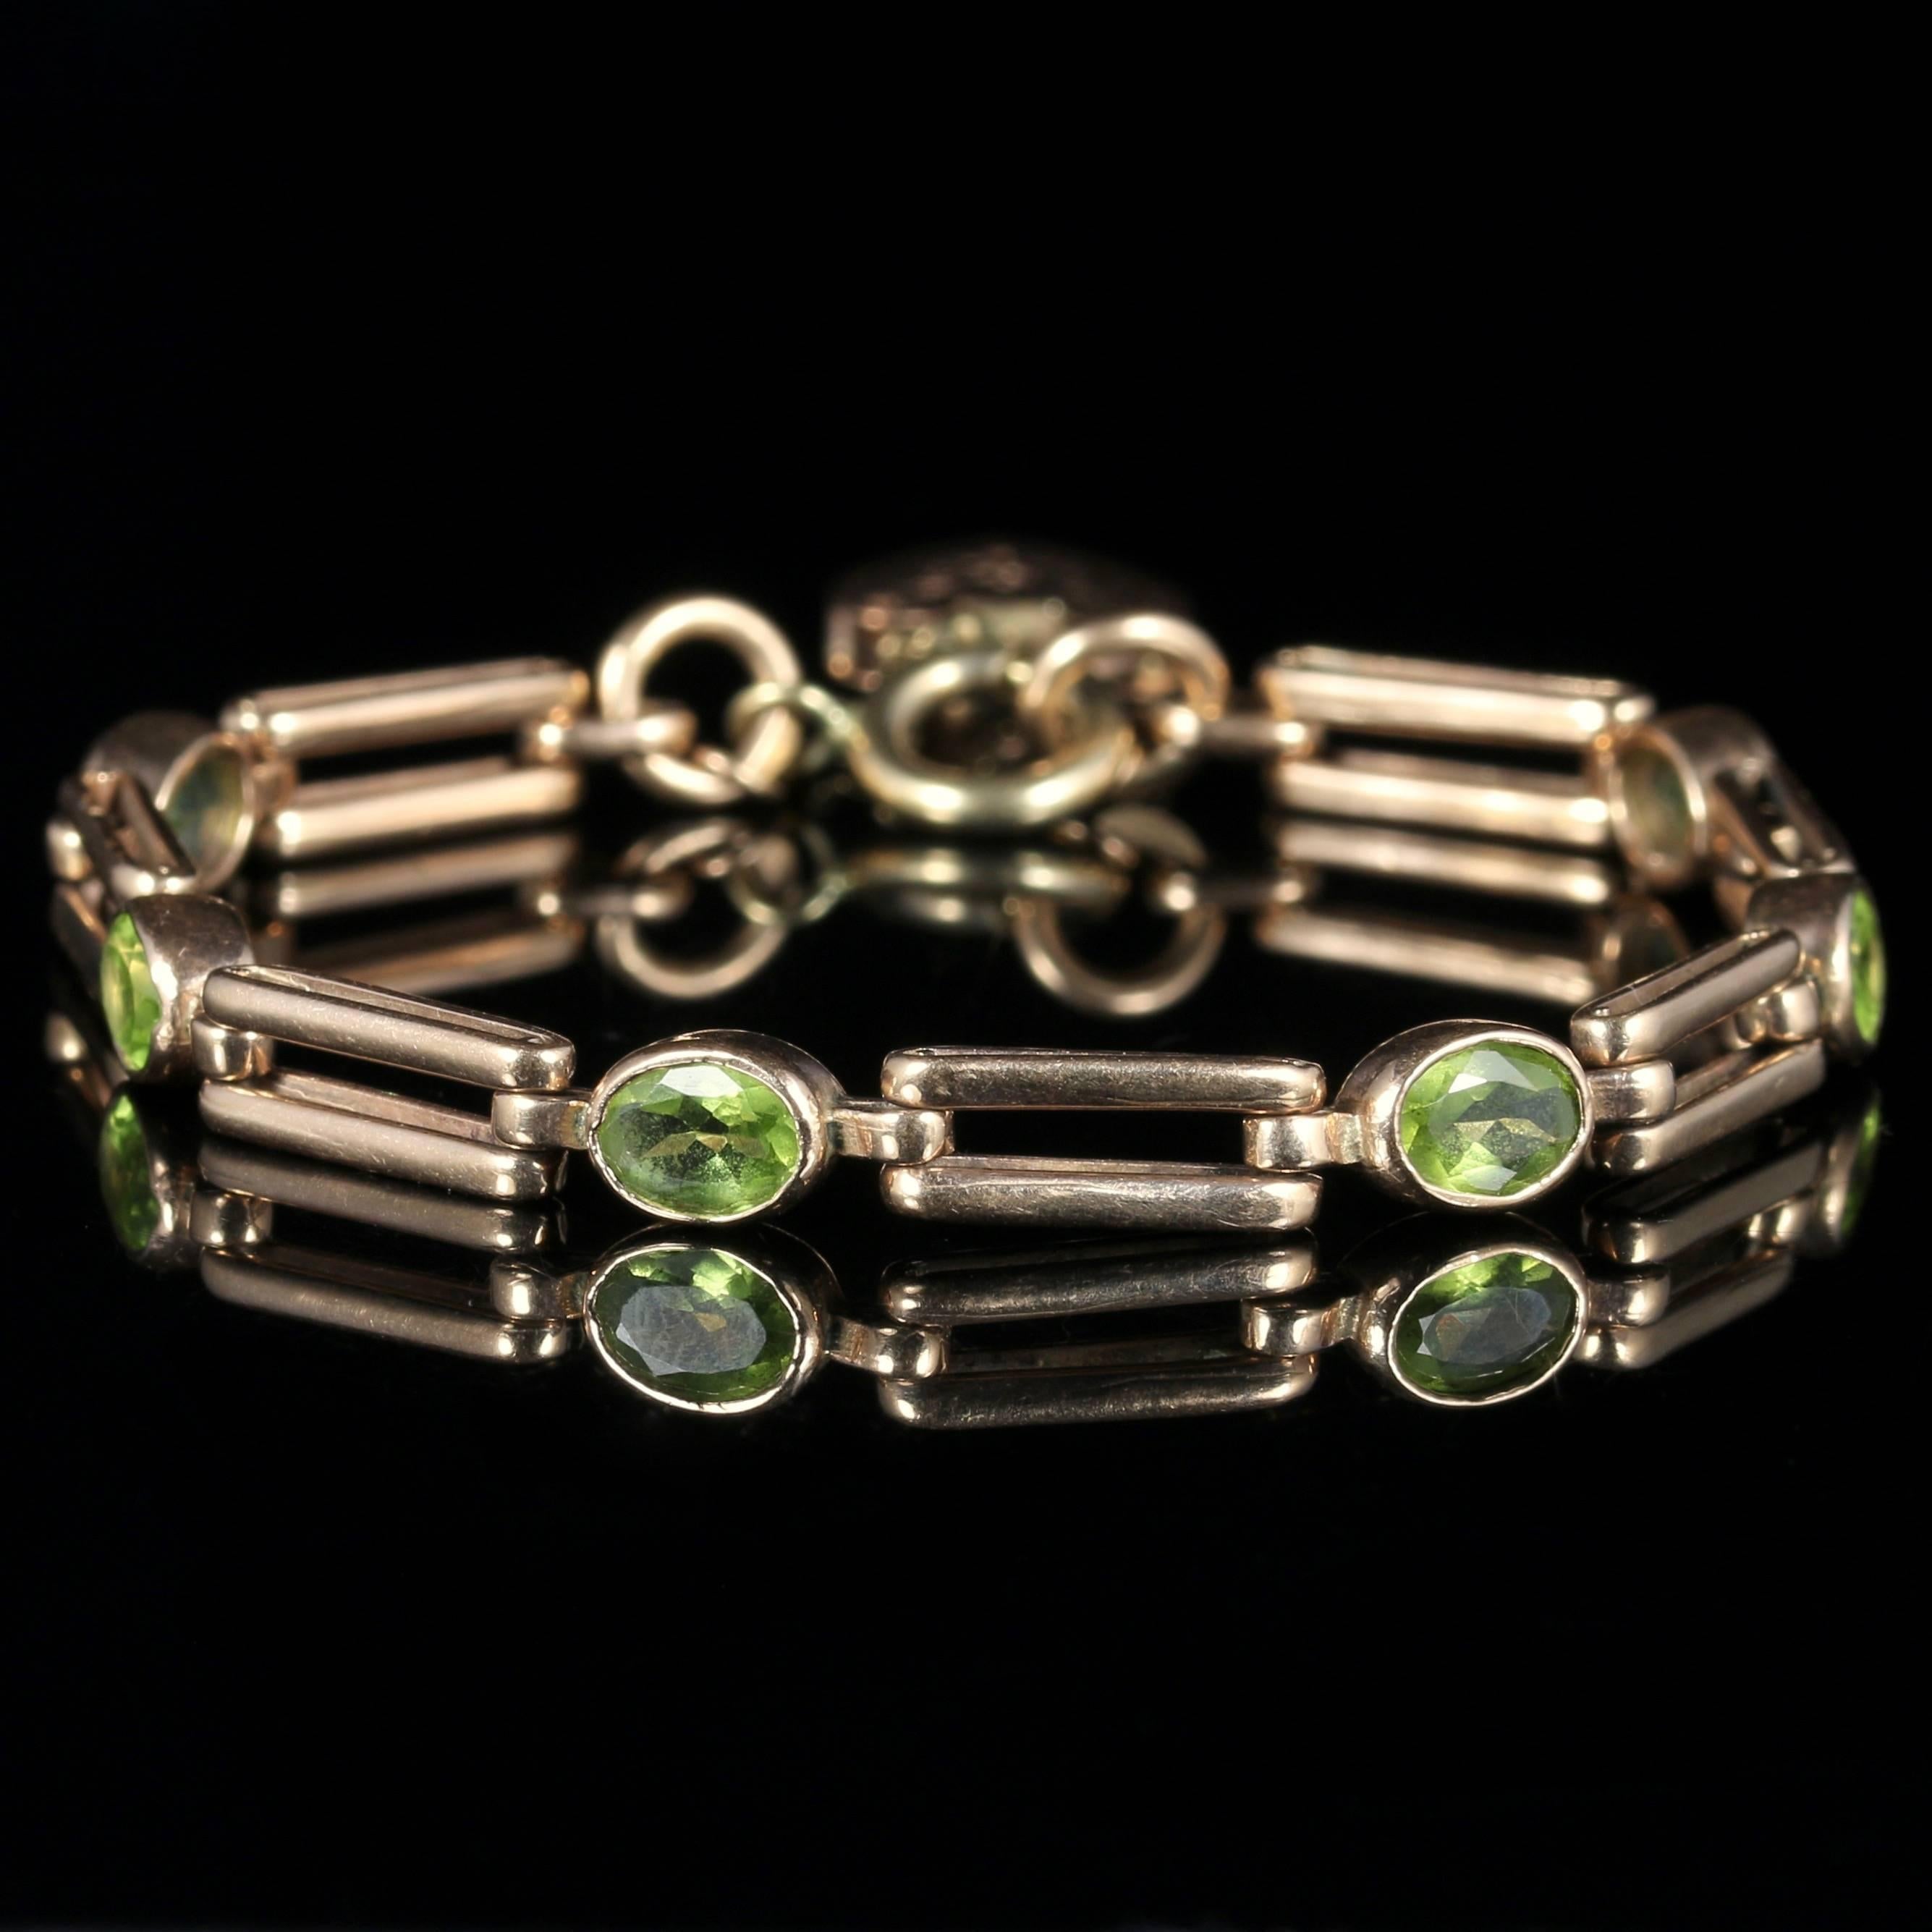 For more details please click continue reading down below...

This fabulous Antique Victorian gate bracelet is made in Rose Gold set with beautiful workmanship all round.

Circa 1900

Adorned with 6 rich green Peridots that sit all the way round